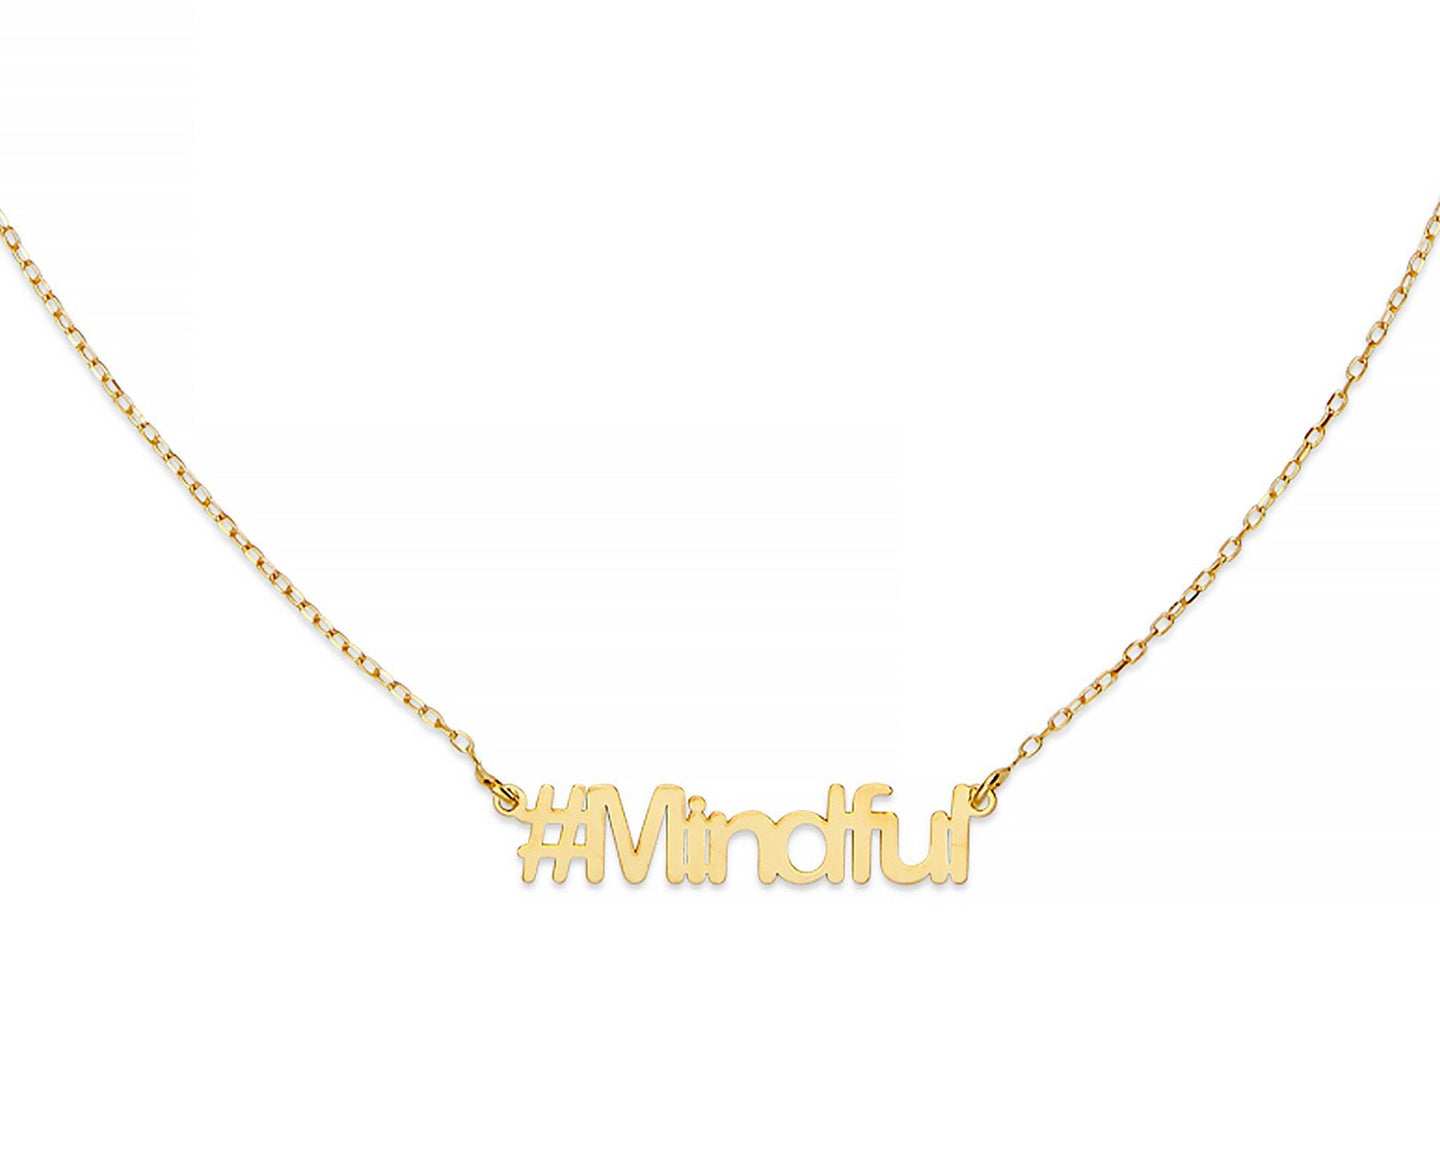 Mindful Hashtag Necklace - InclusiveJewelry